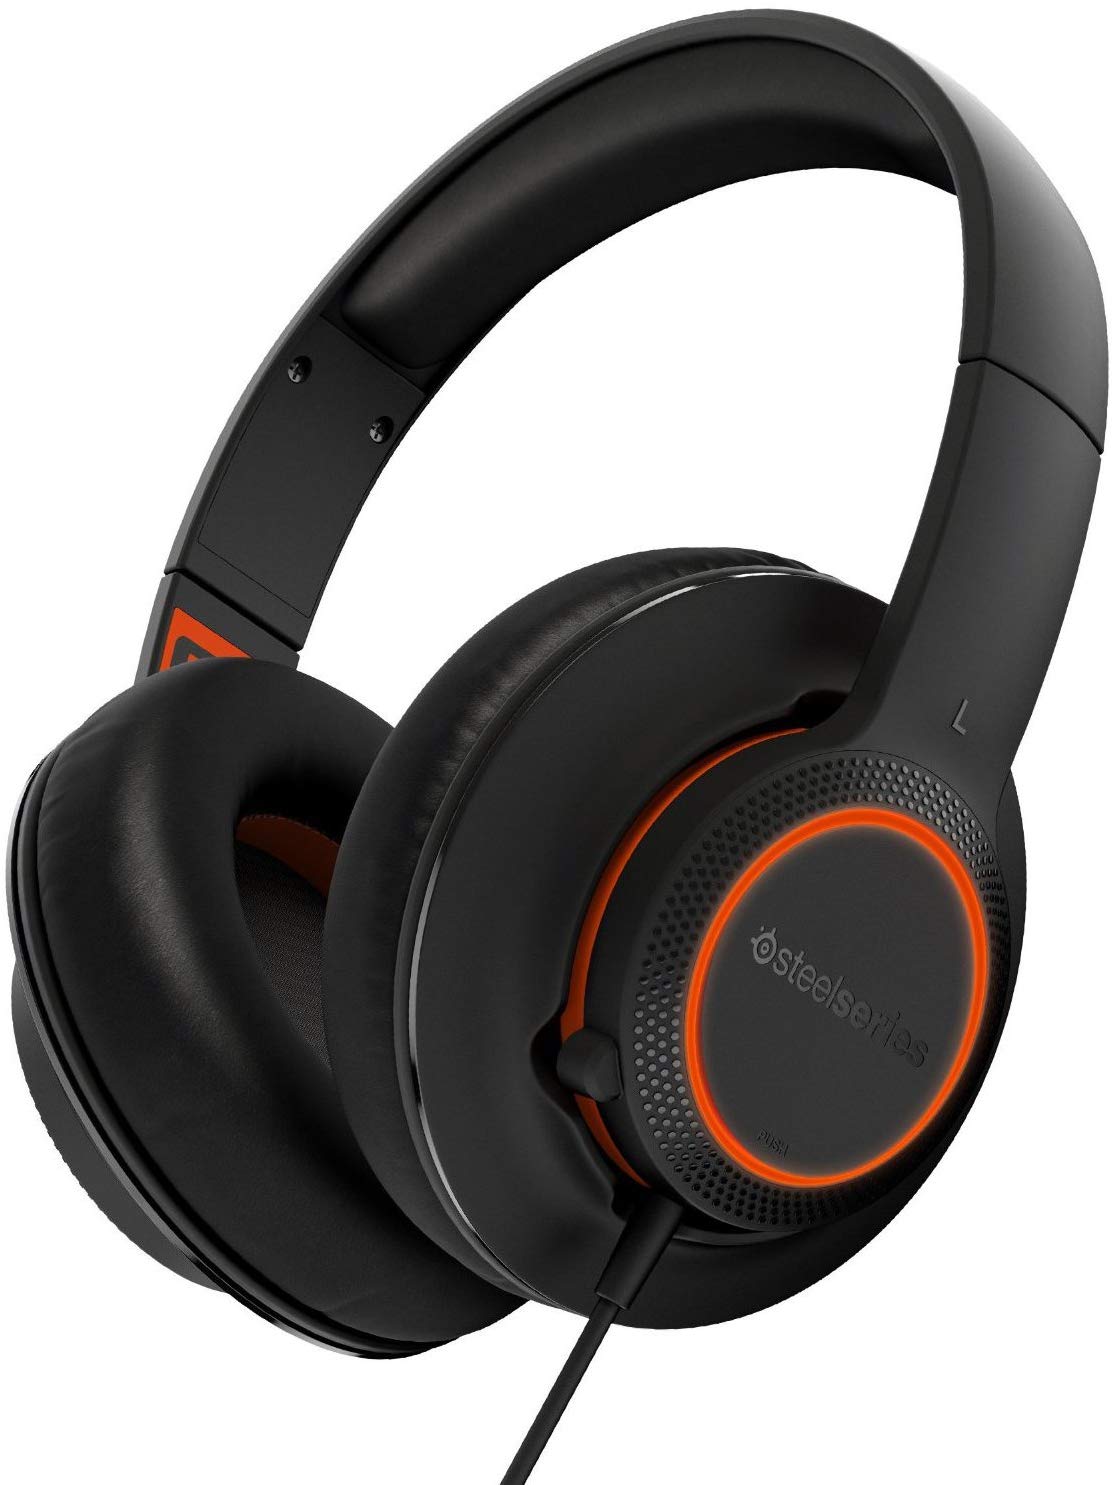 Top 8 Best SteelSeries Headsets of 2022 - Reviews and Comparison